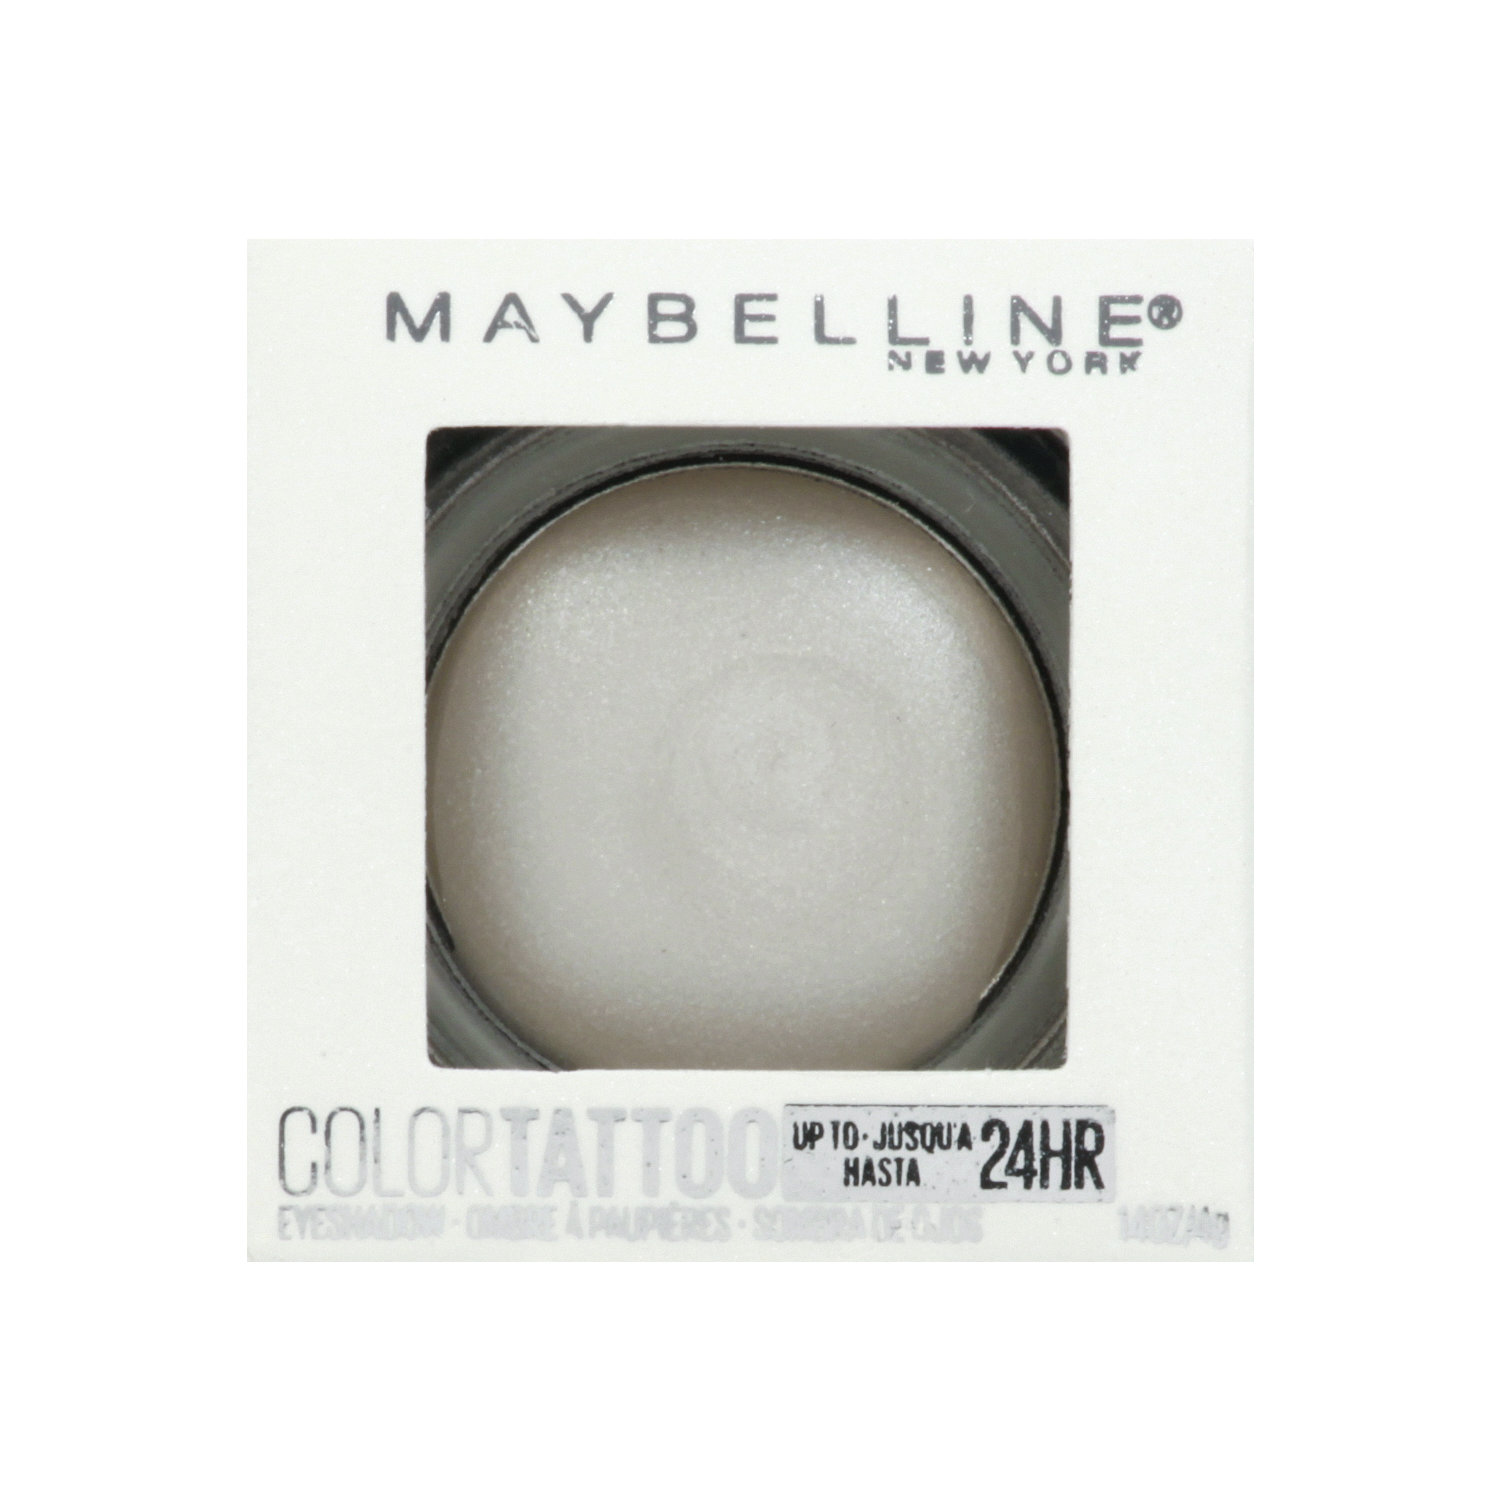 Maybelline New York Color Tattoo - Painted Purple - Reviews | MakeupAlley